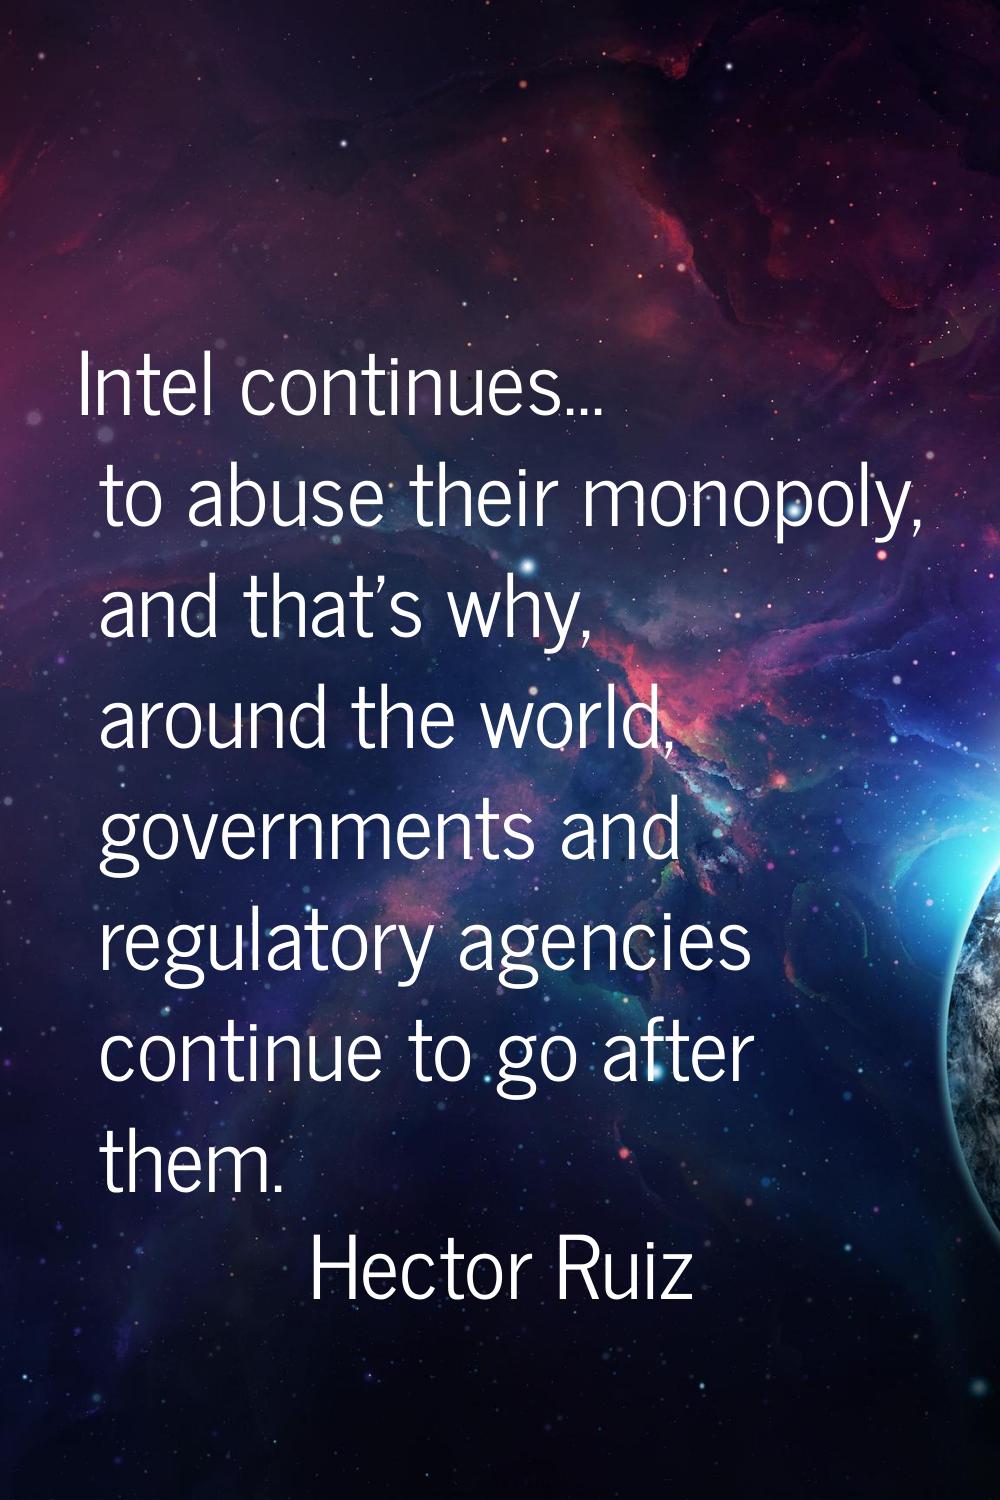 Intel continues... to abuse their monopoly, and that's why, around the world, governments and regul